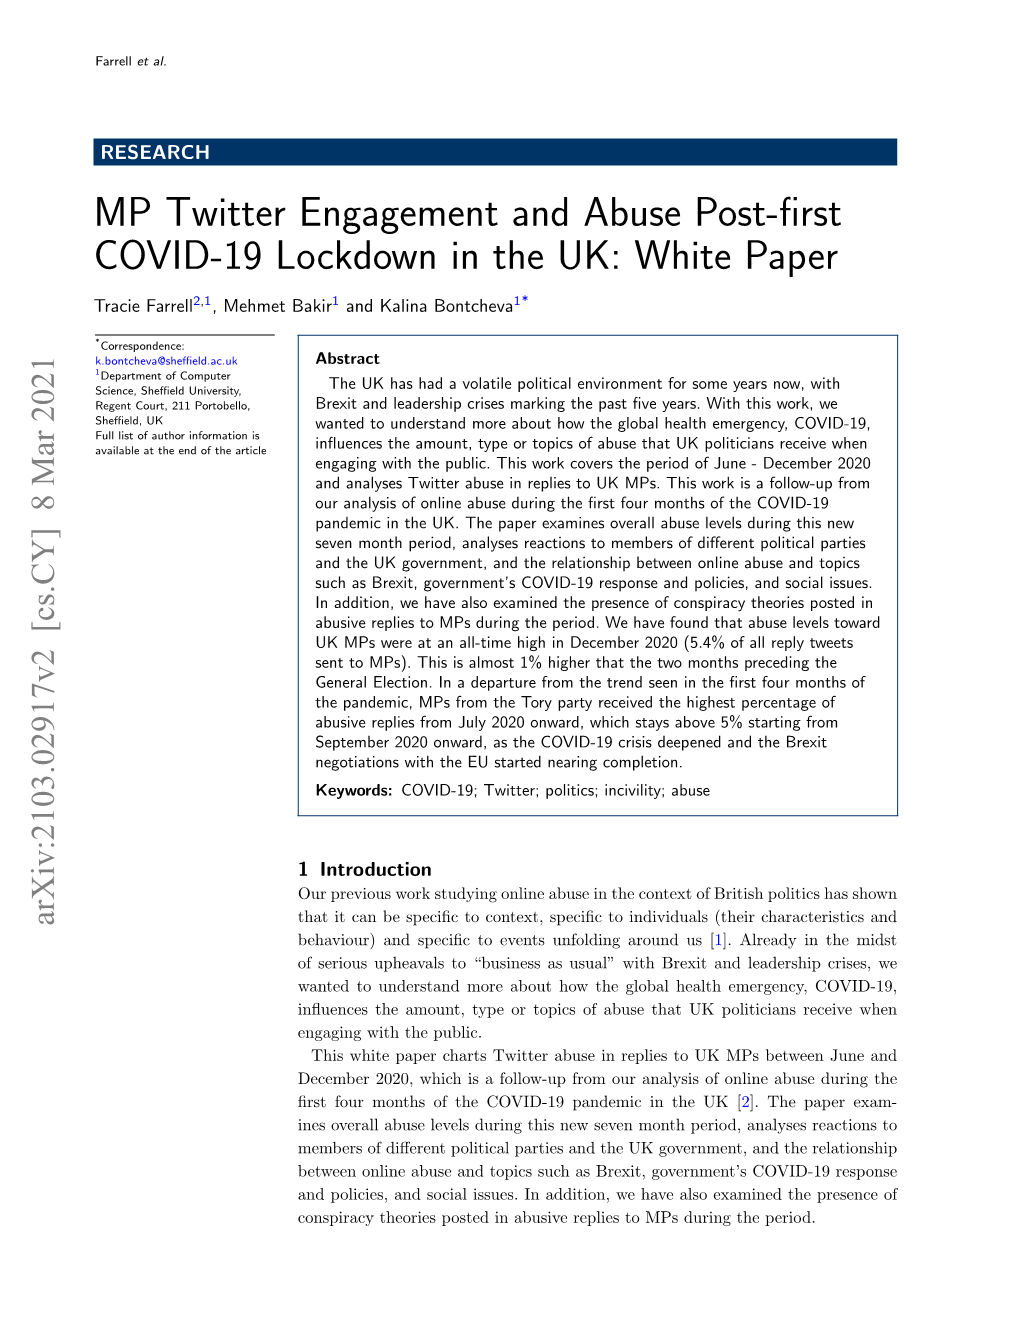 MP Twitter Engagement and Abuse Post-First COVID-19